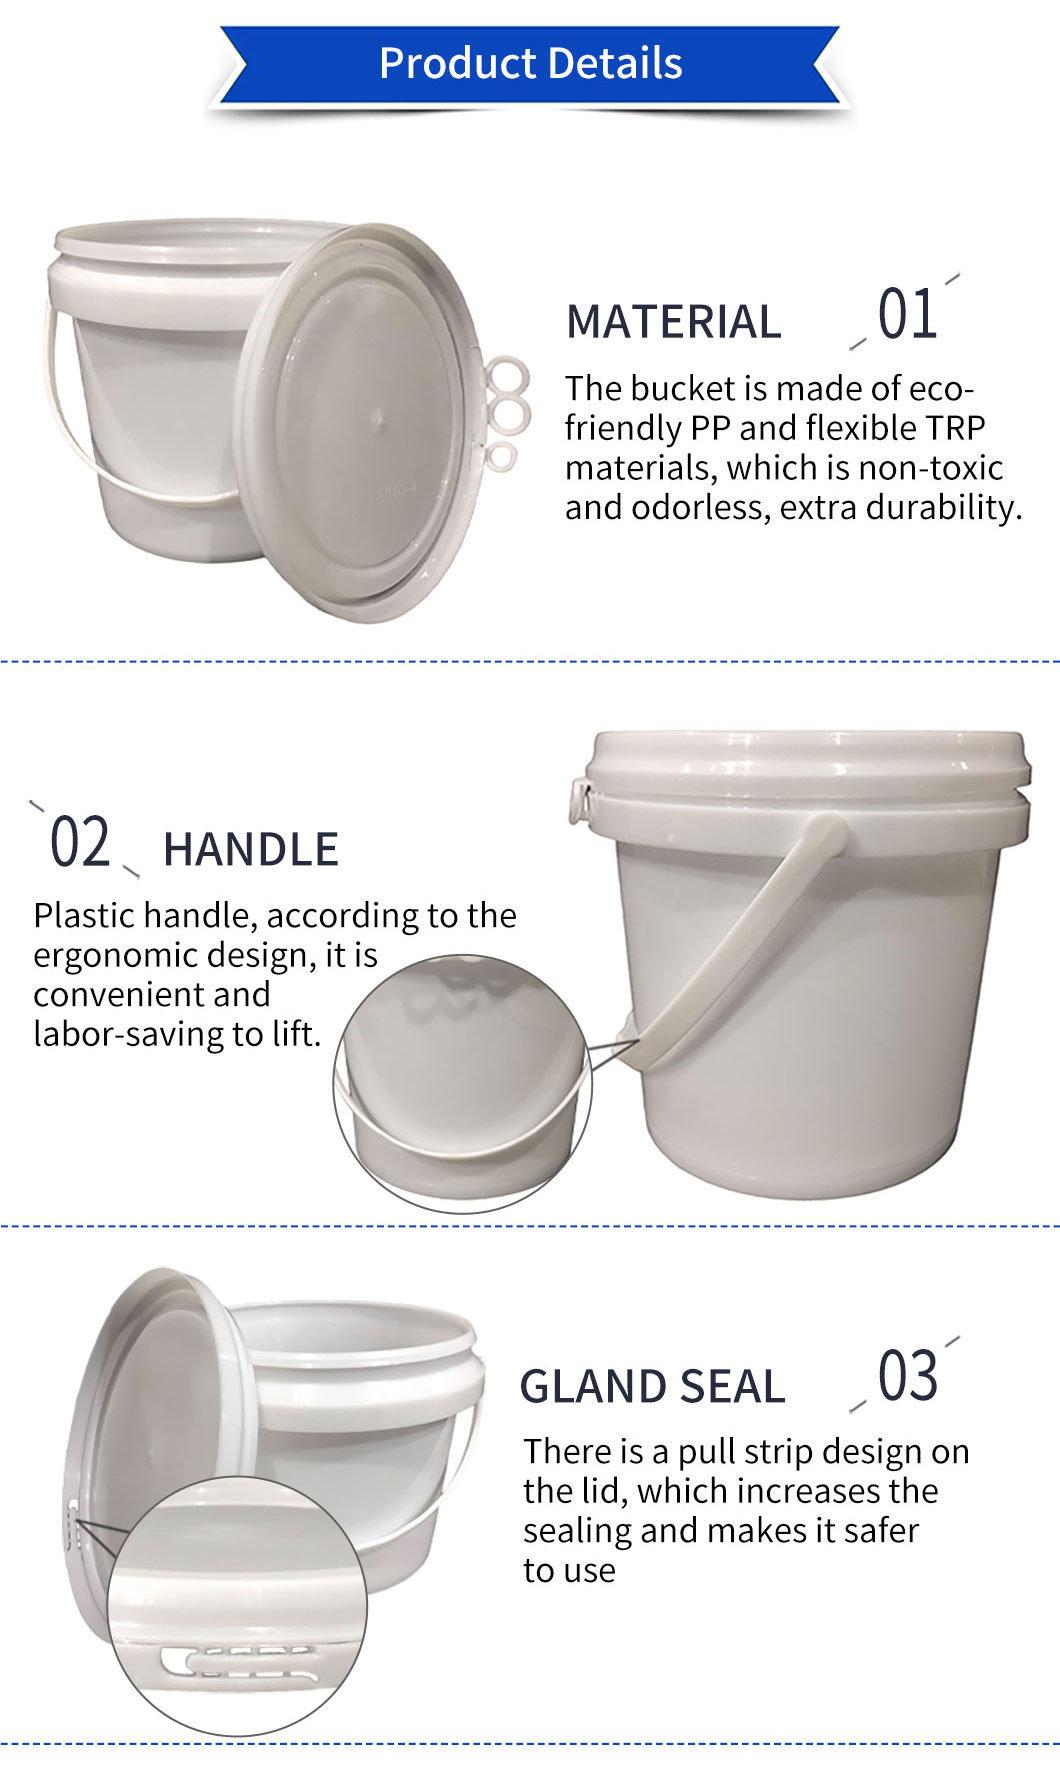 1 Litre Plastic Pail with T Tab - Lid, Airtight and Durable